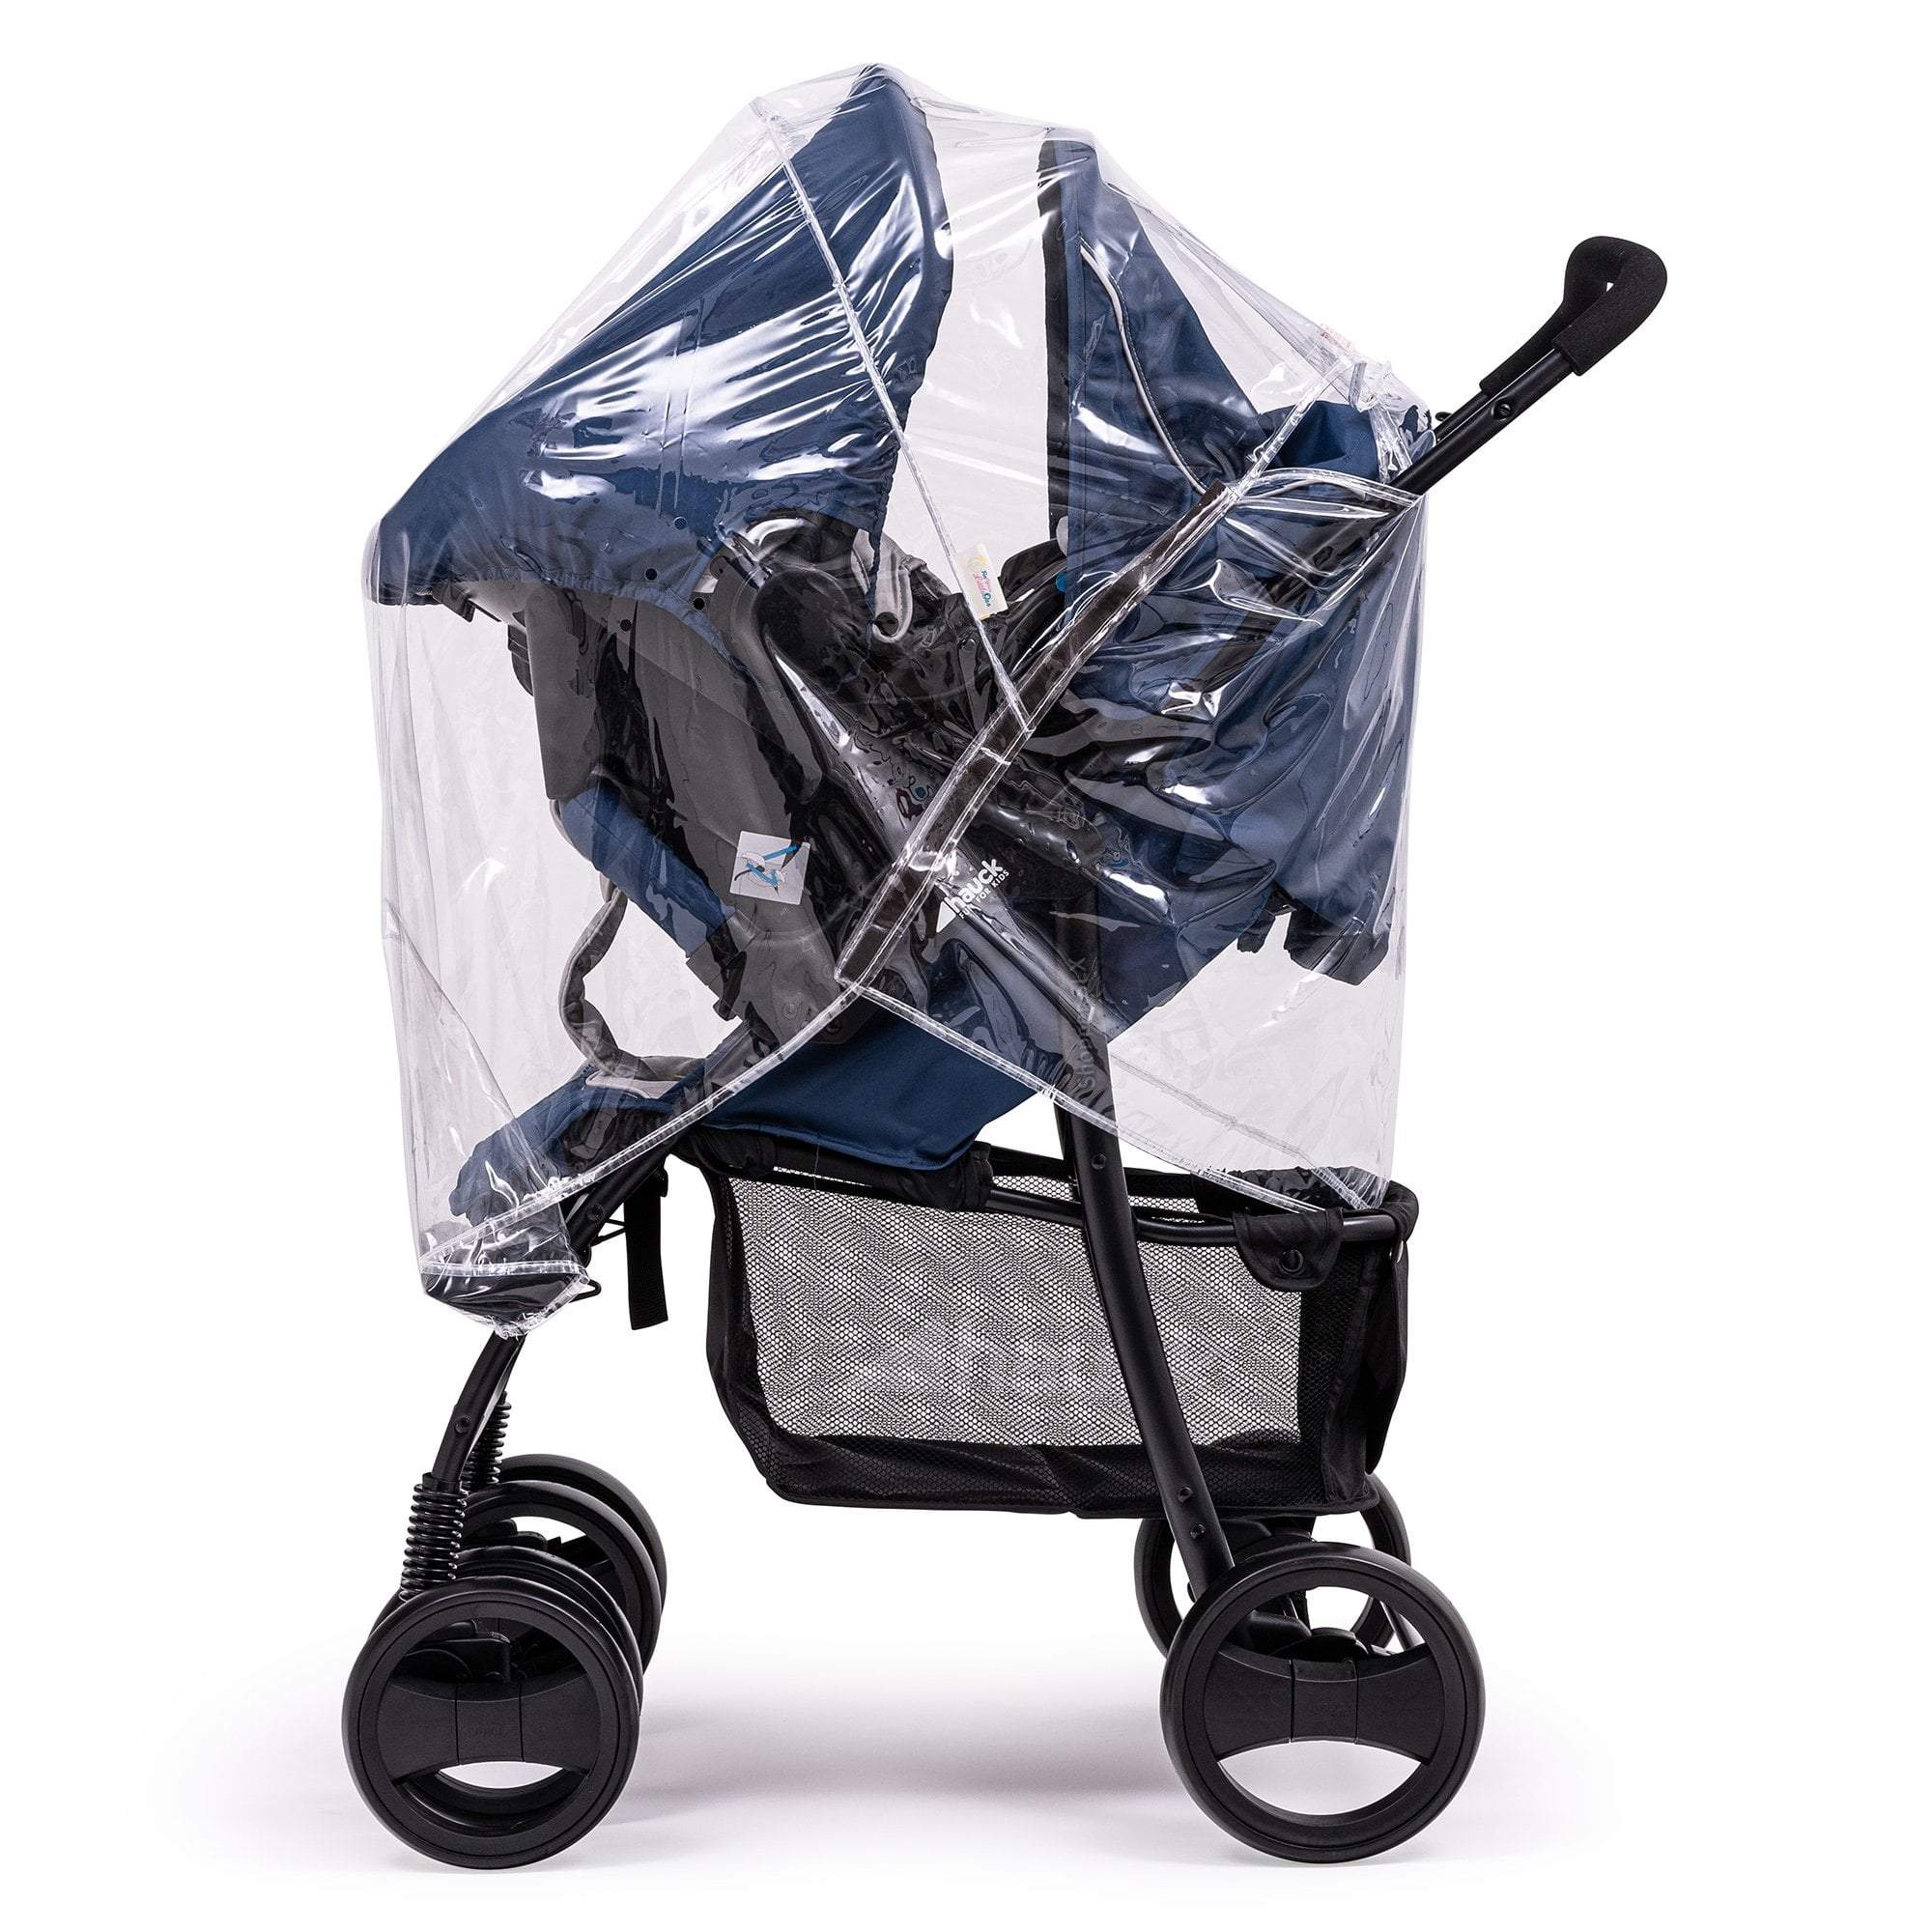 Travel System Raincover Compatible with Cam - Fits All Models - For Your Little One